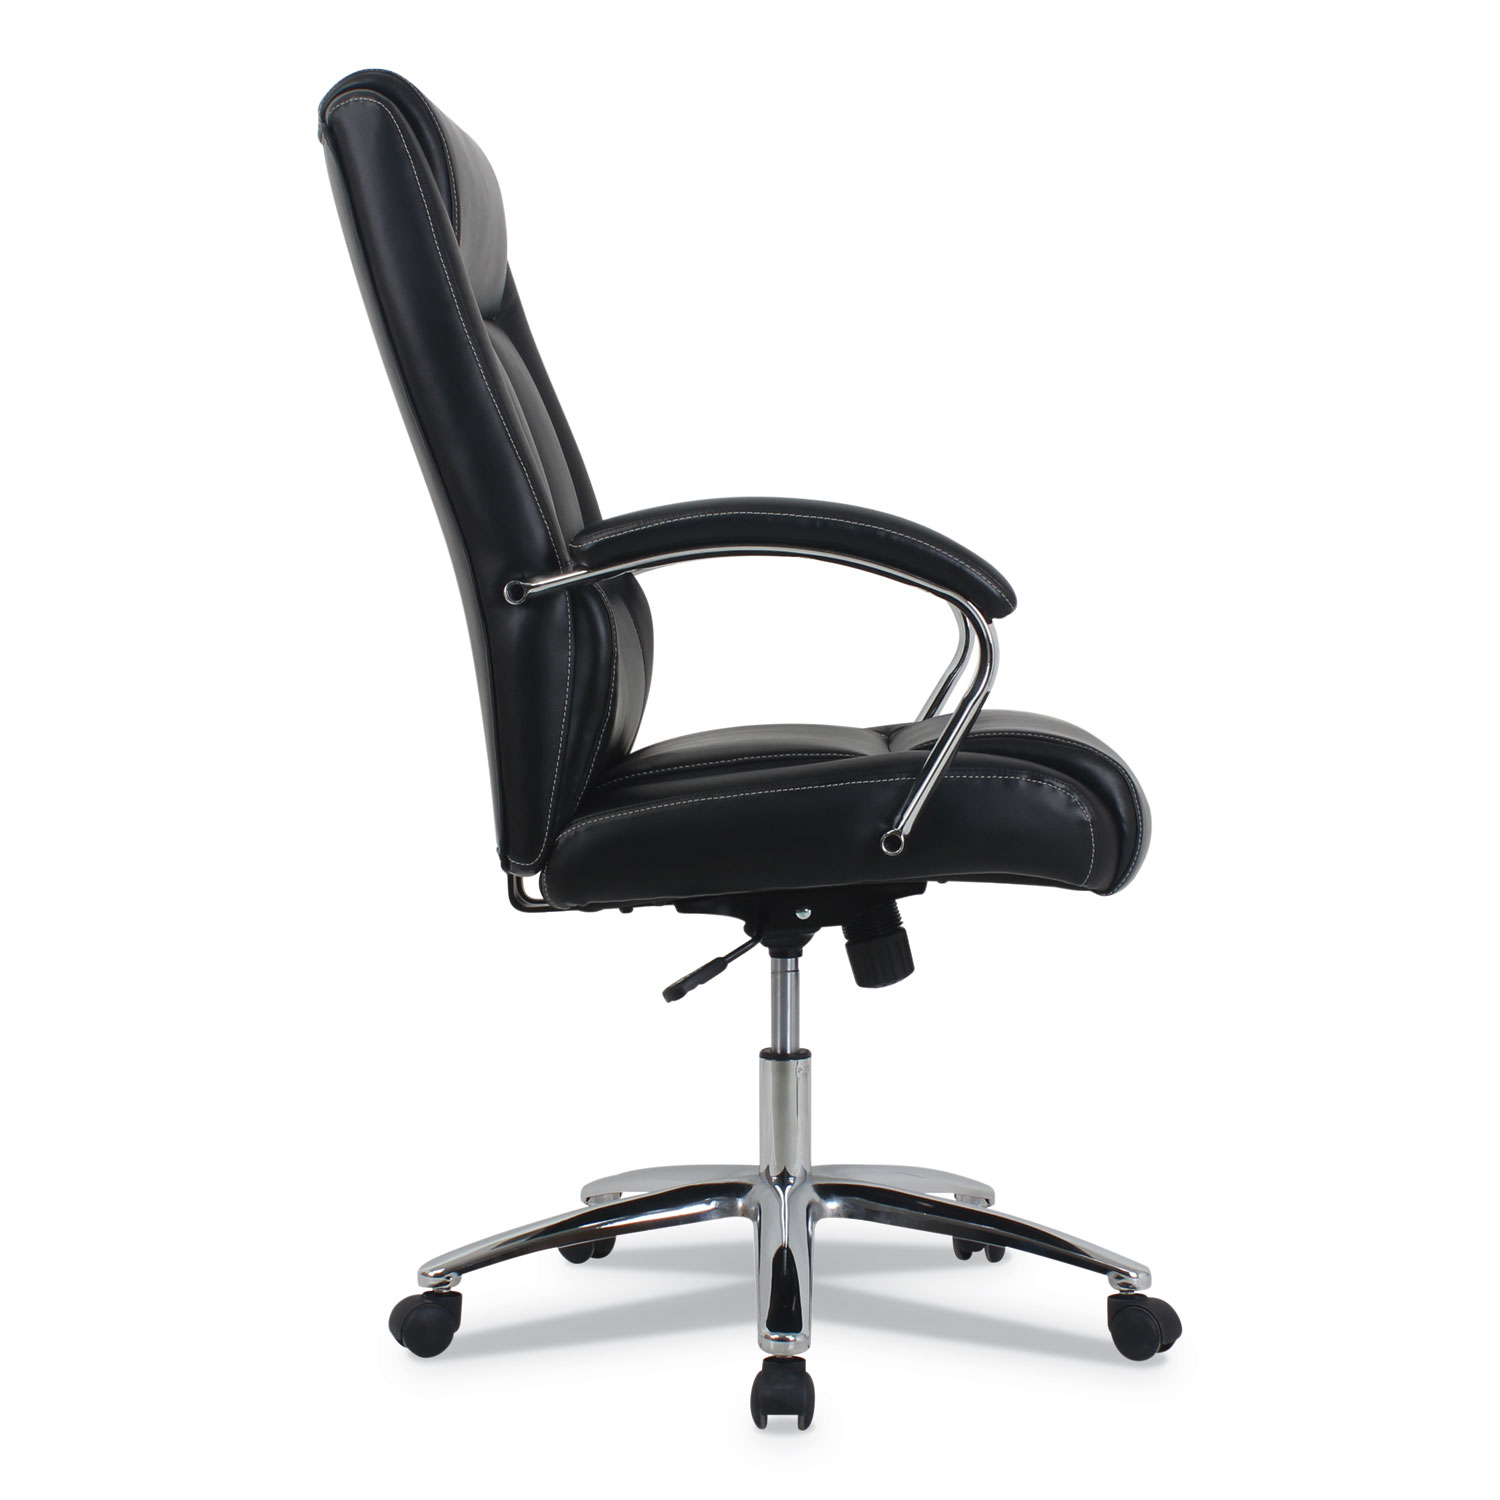 kathy ireland OFFICE by Alera Stonebriar High-Back Executive Office Chair, Up to 275 lbs., Black Seat/Back, Chrome Base